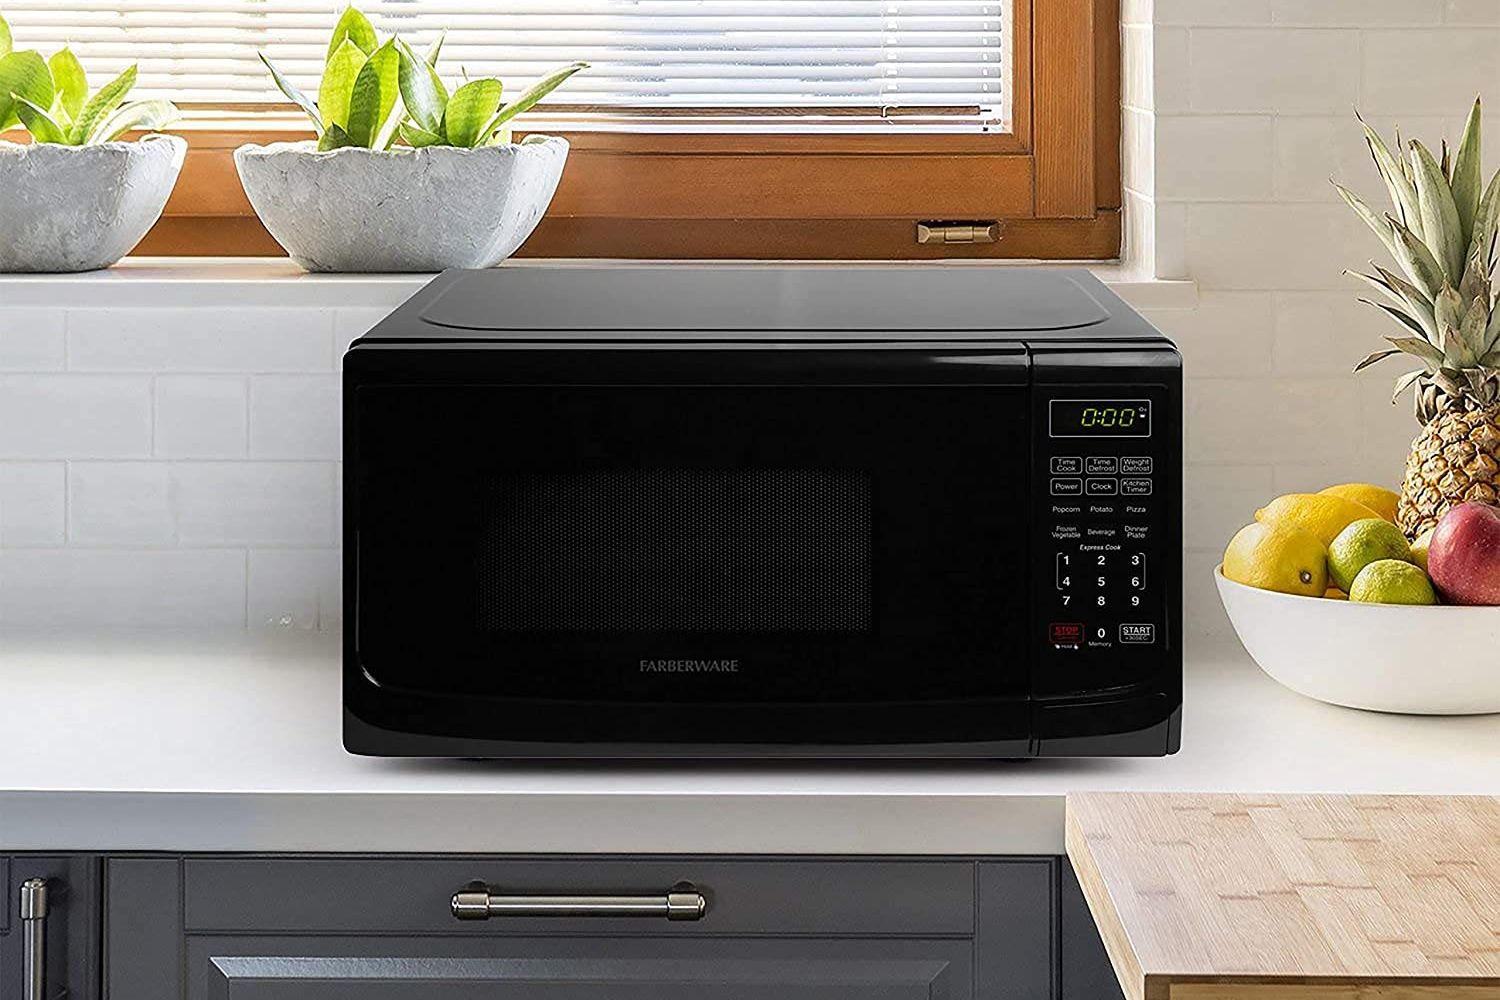 The best microwaves option sitting on a kitchen counter